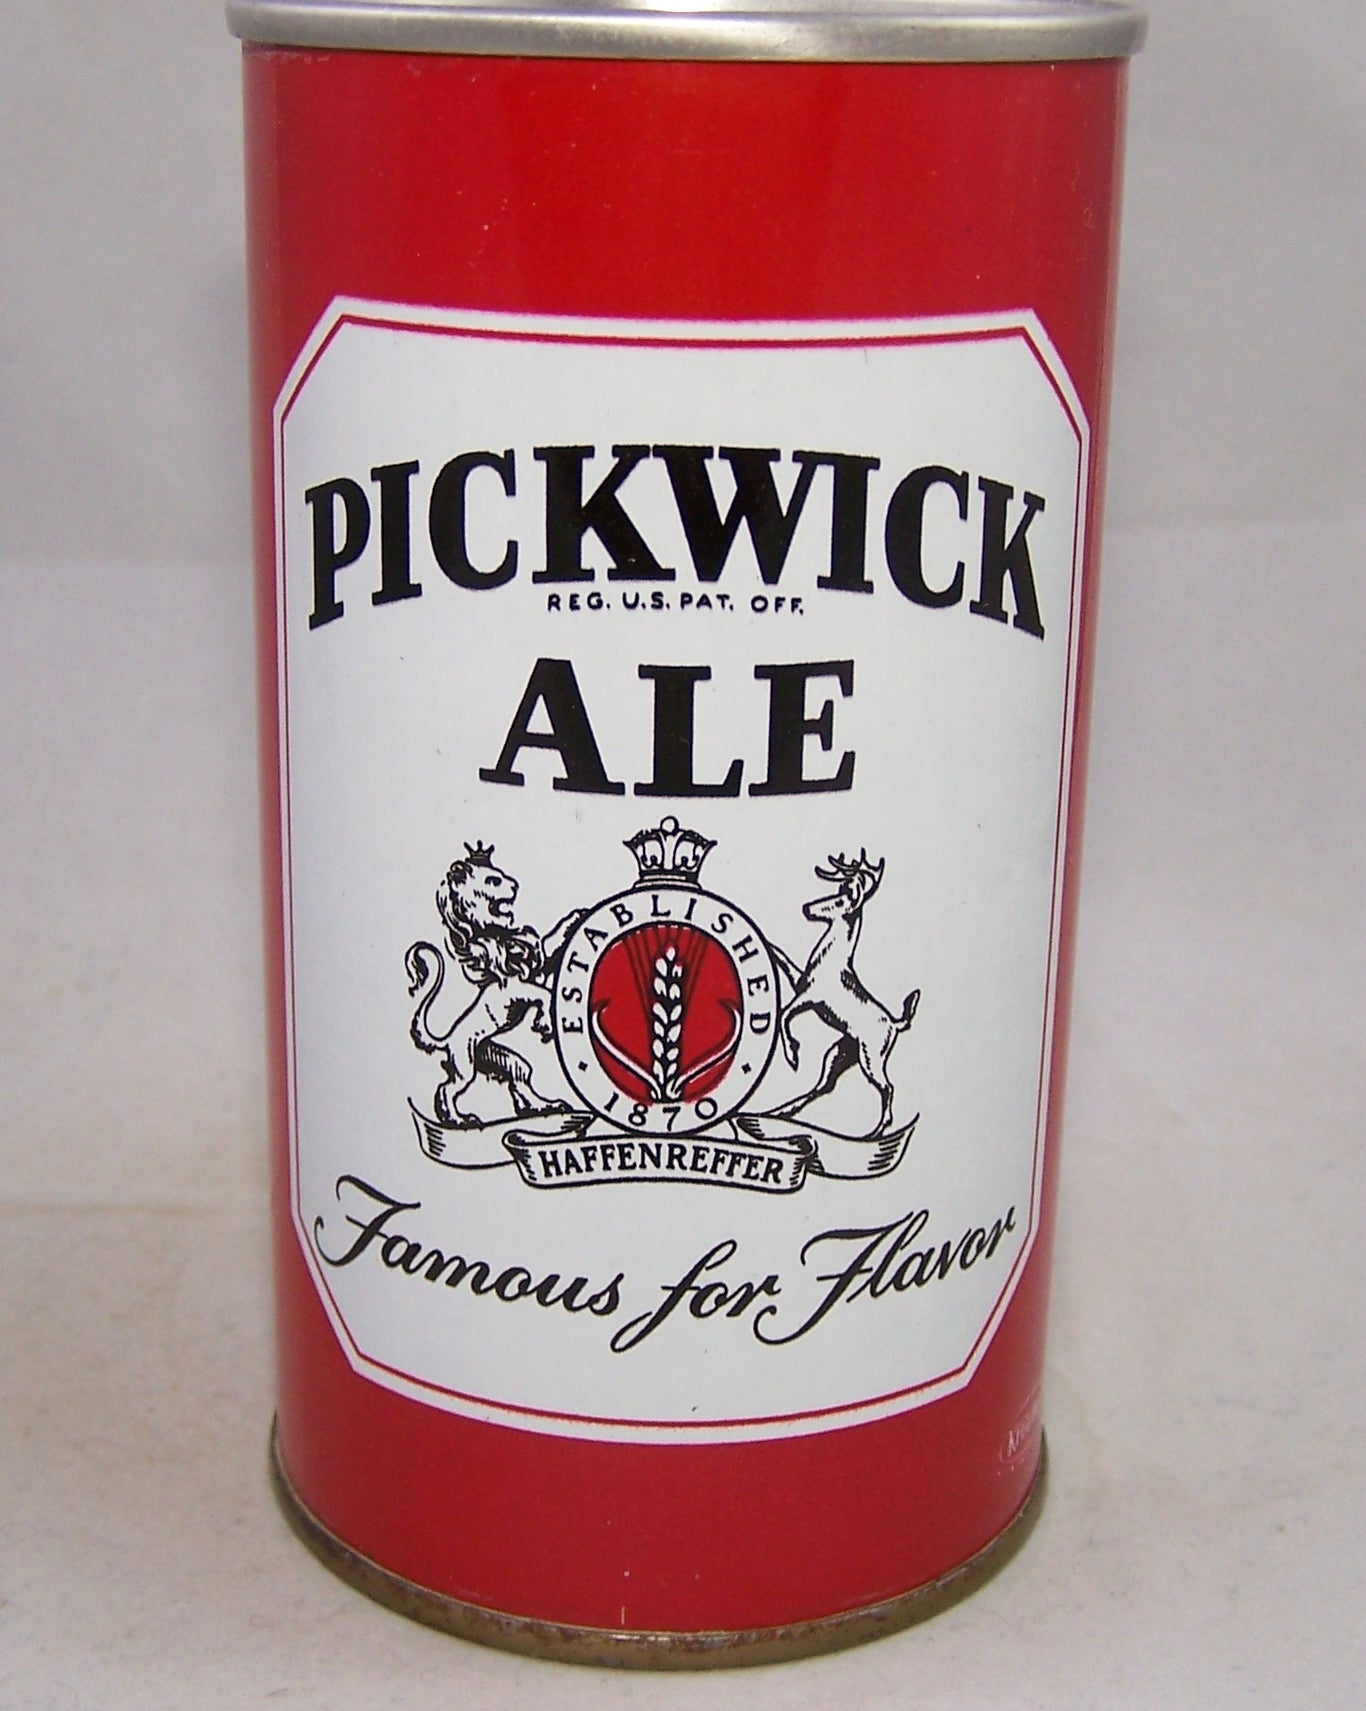 Pickwick Ale "Famous for Flavor" USBC II 108-34. Grade 1/1+